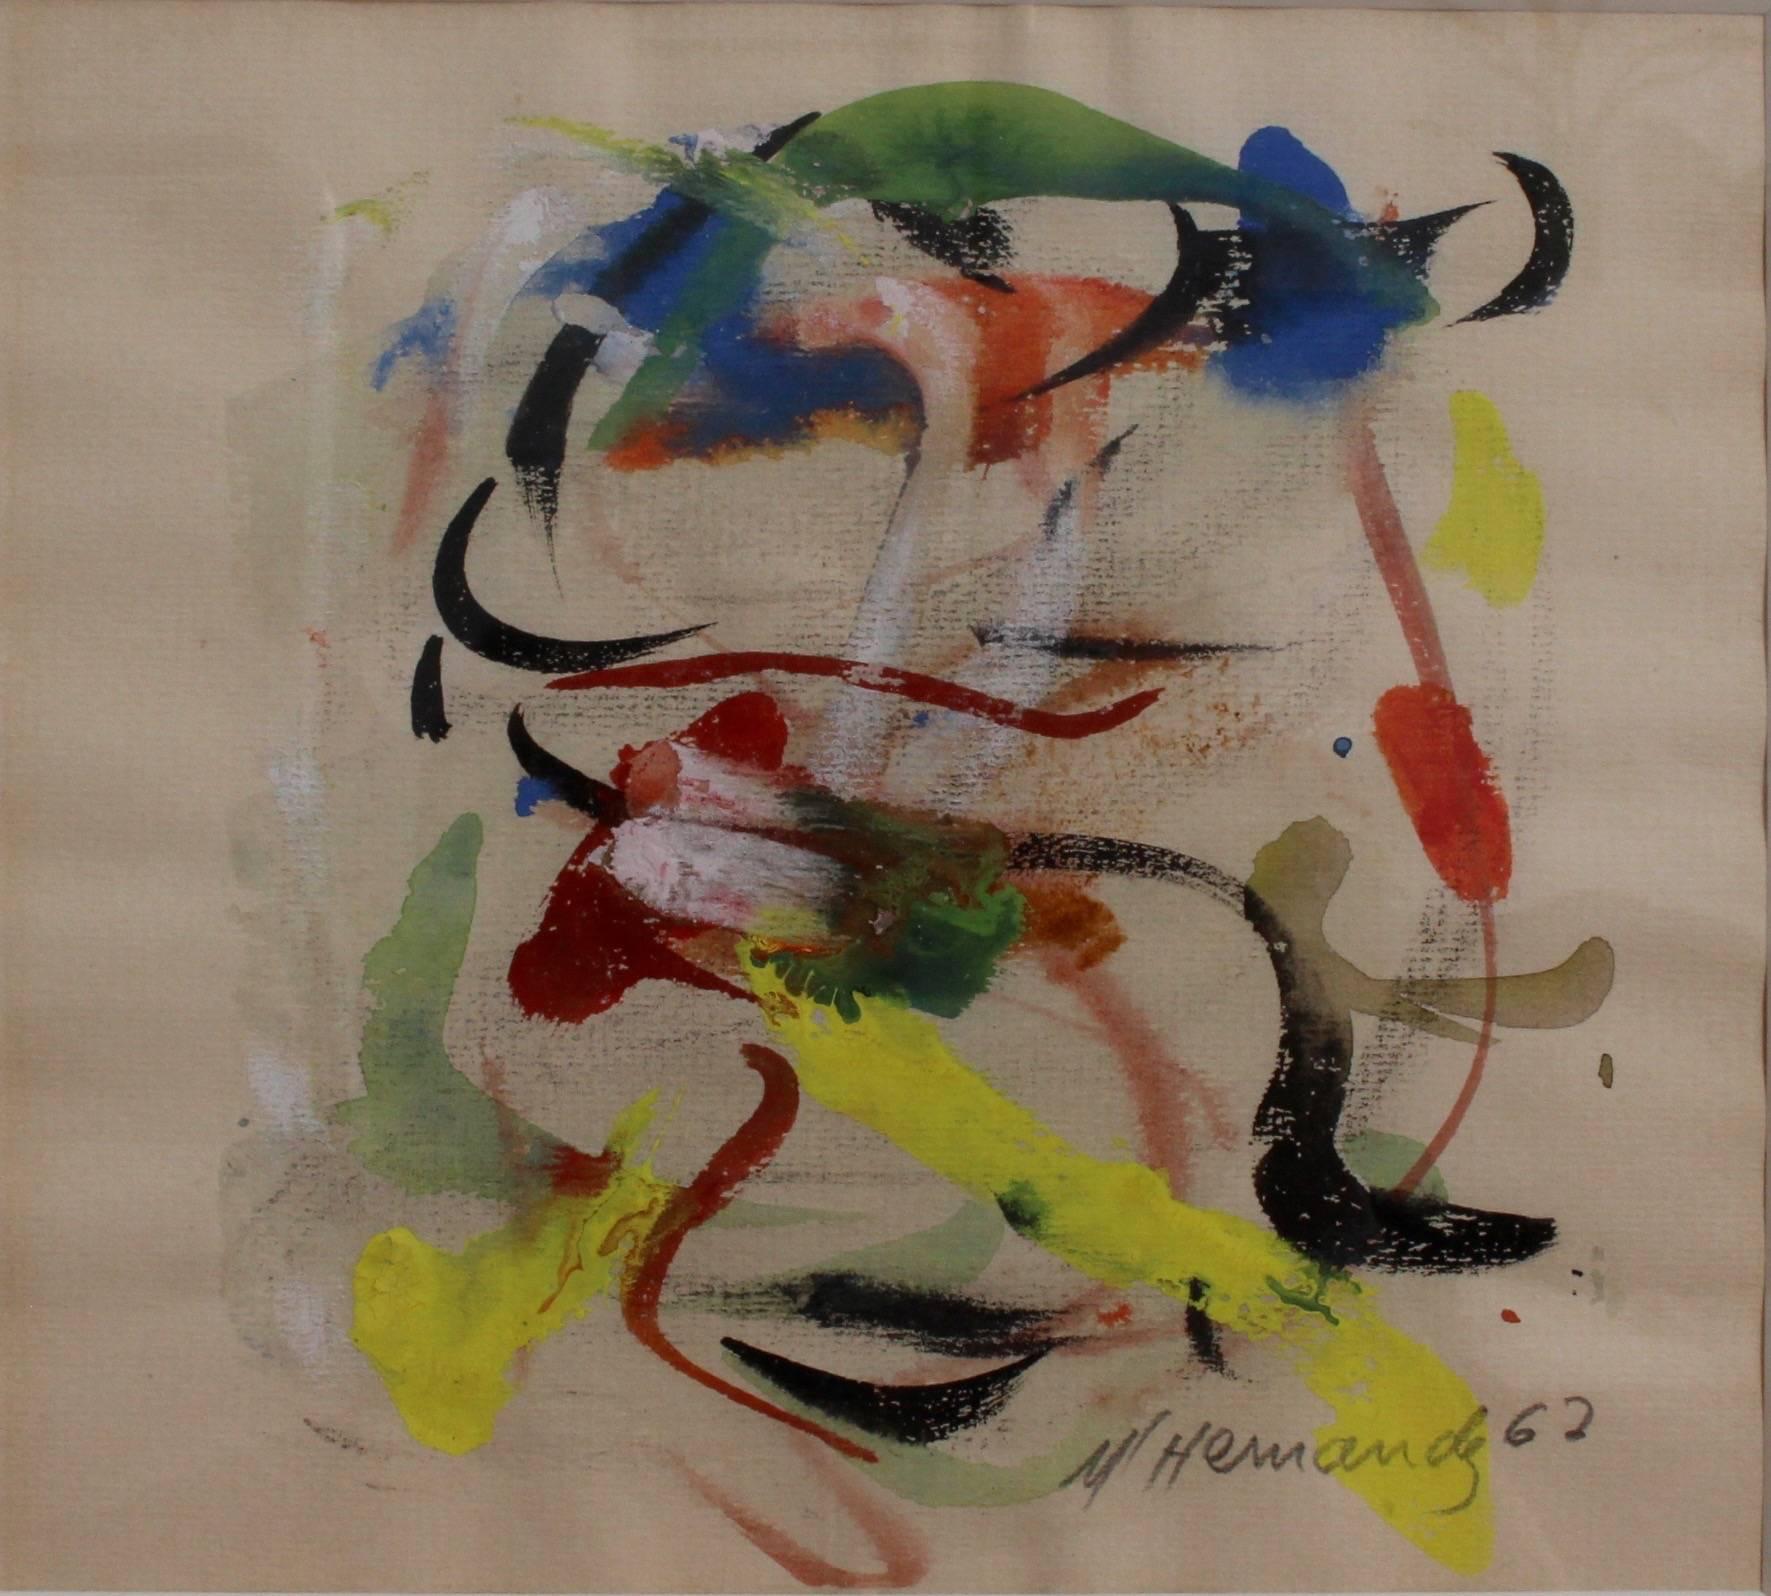 Watercolour on fine paper by M. Hernandez. This abstract triptych consists of paintings that span the years 1961 - 1963 neatly mounted in original frame with new glass. The abstract work creates a whirlwind of colour, symmetry and movement. There is